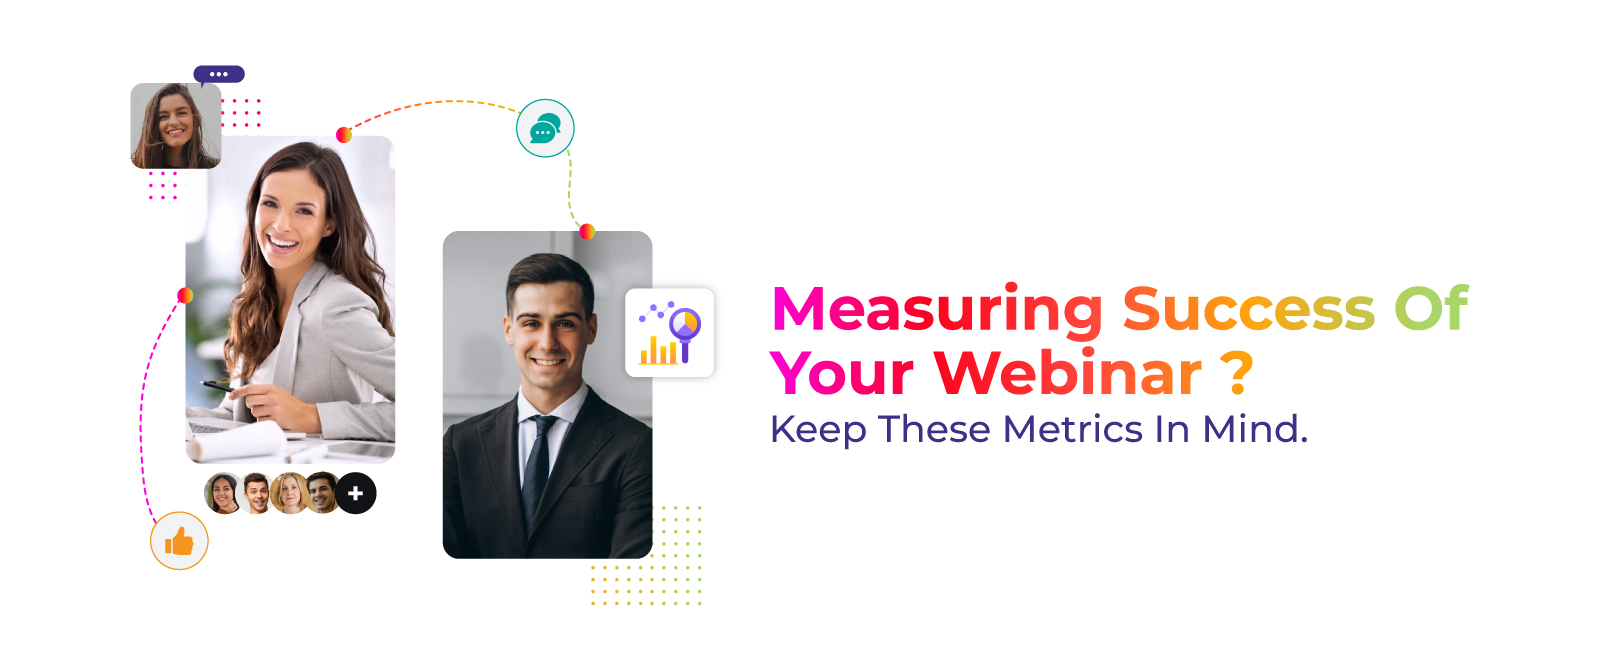 How to Measure the Success of Your Webinar